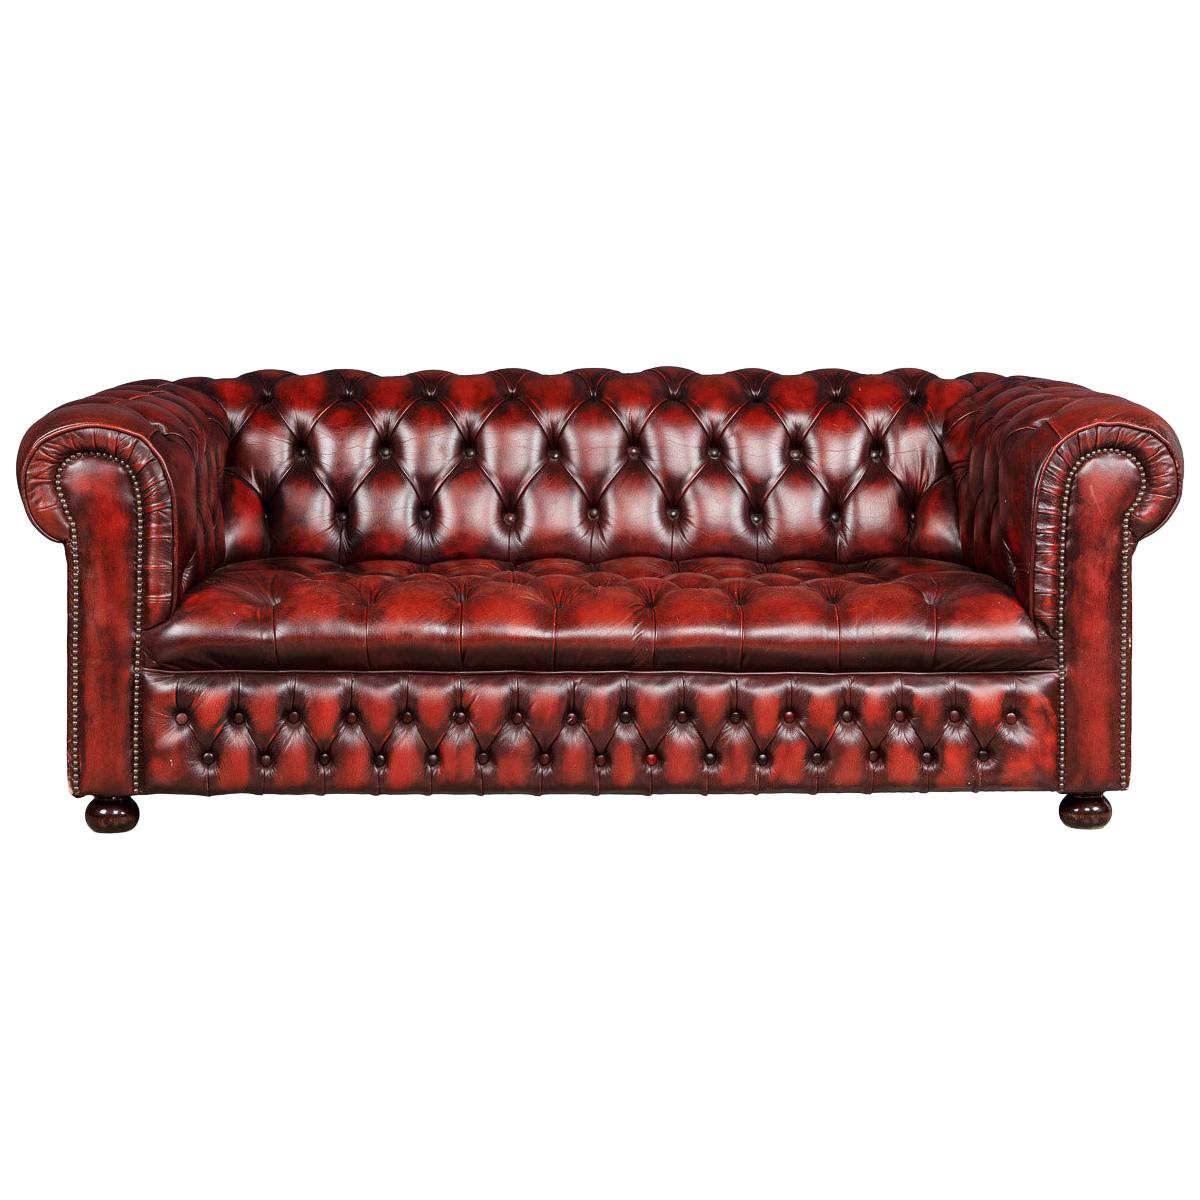 20th Century Red Leather Chesterfield Sofa with Button Down Seat, circa 1970